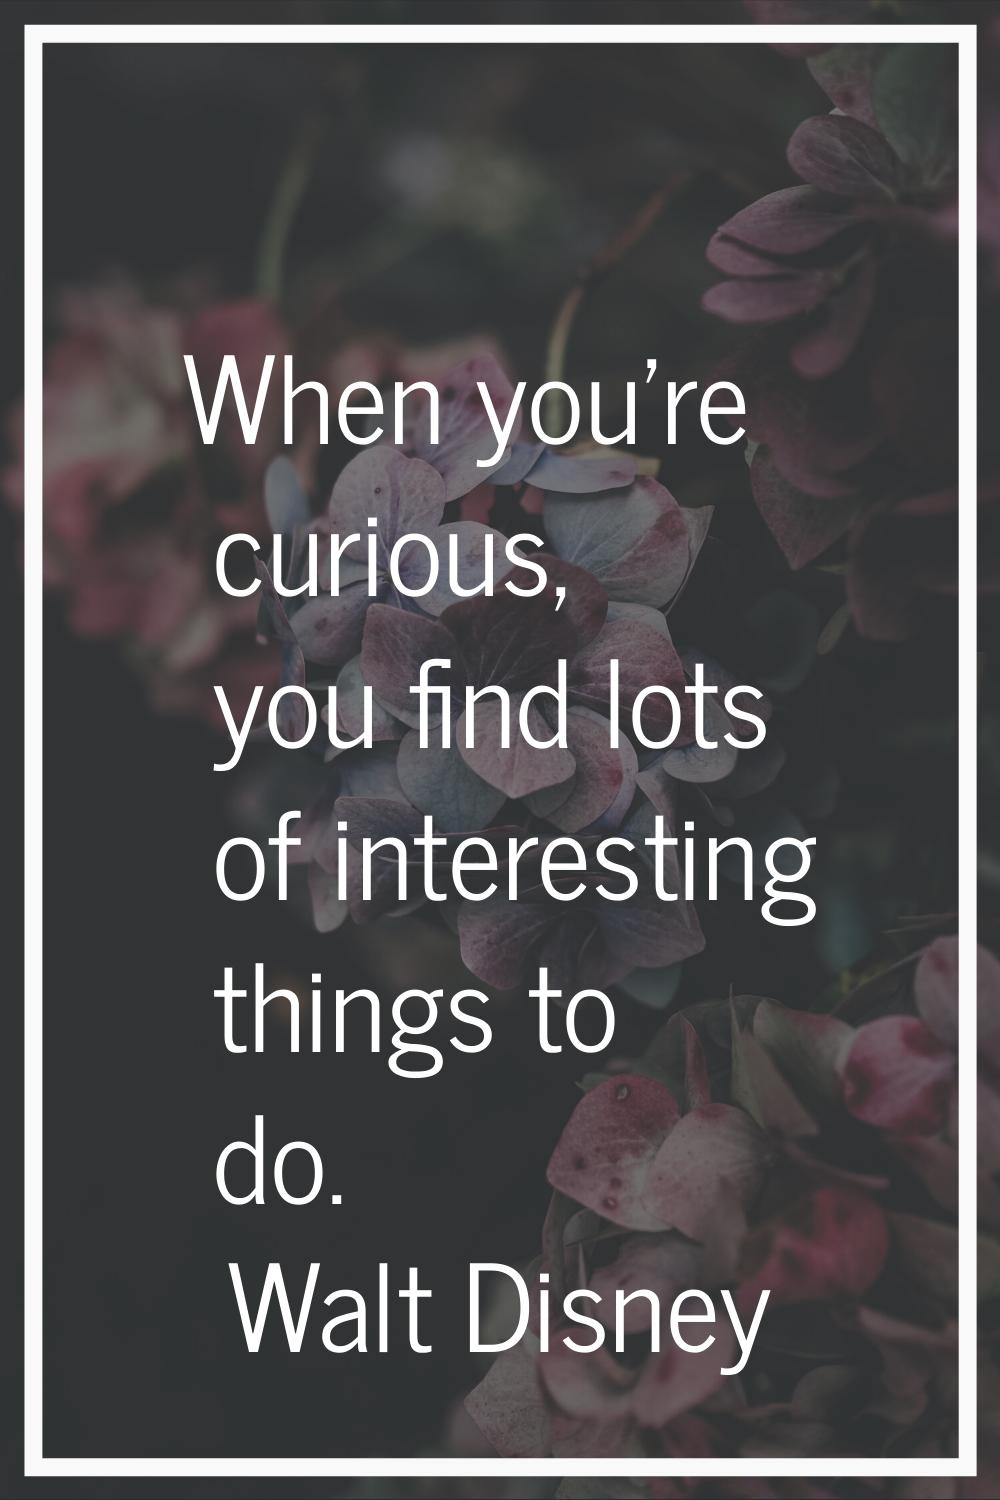 When you're curious, you find lots of interesting things to do.